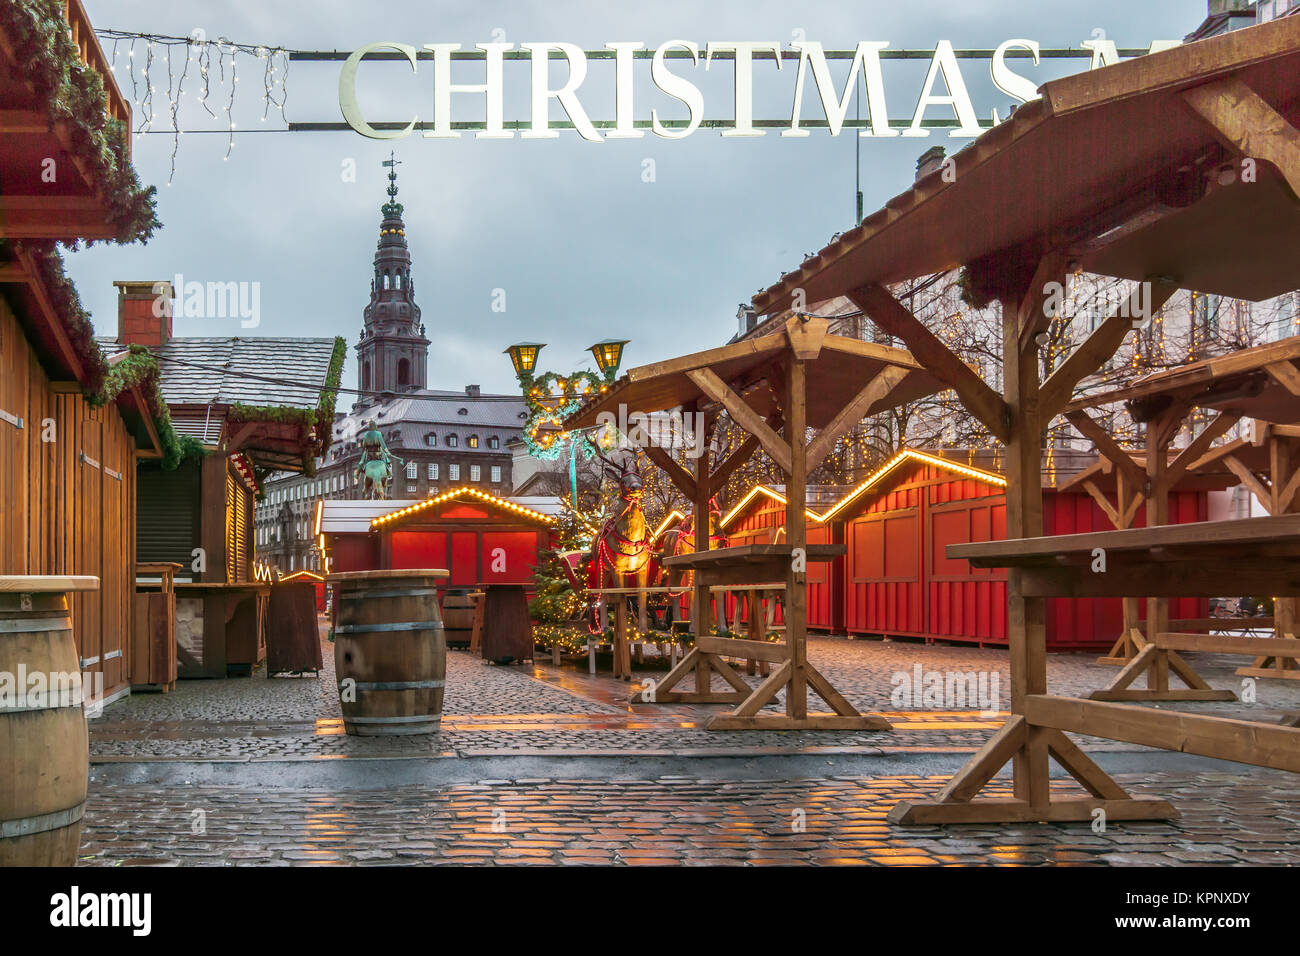 Market-place with a Christmas banner over the square and red woodsheds at Amager an early morning, Copenhagen, Denmark, December 6, 2017 Stock Photo